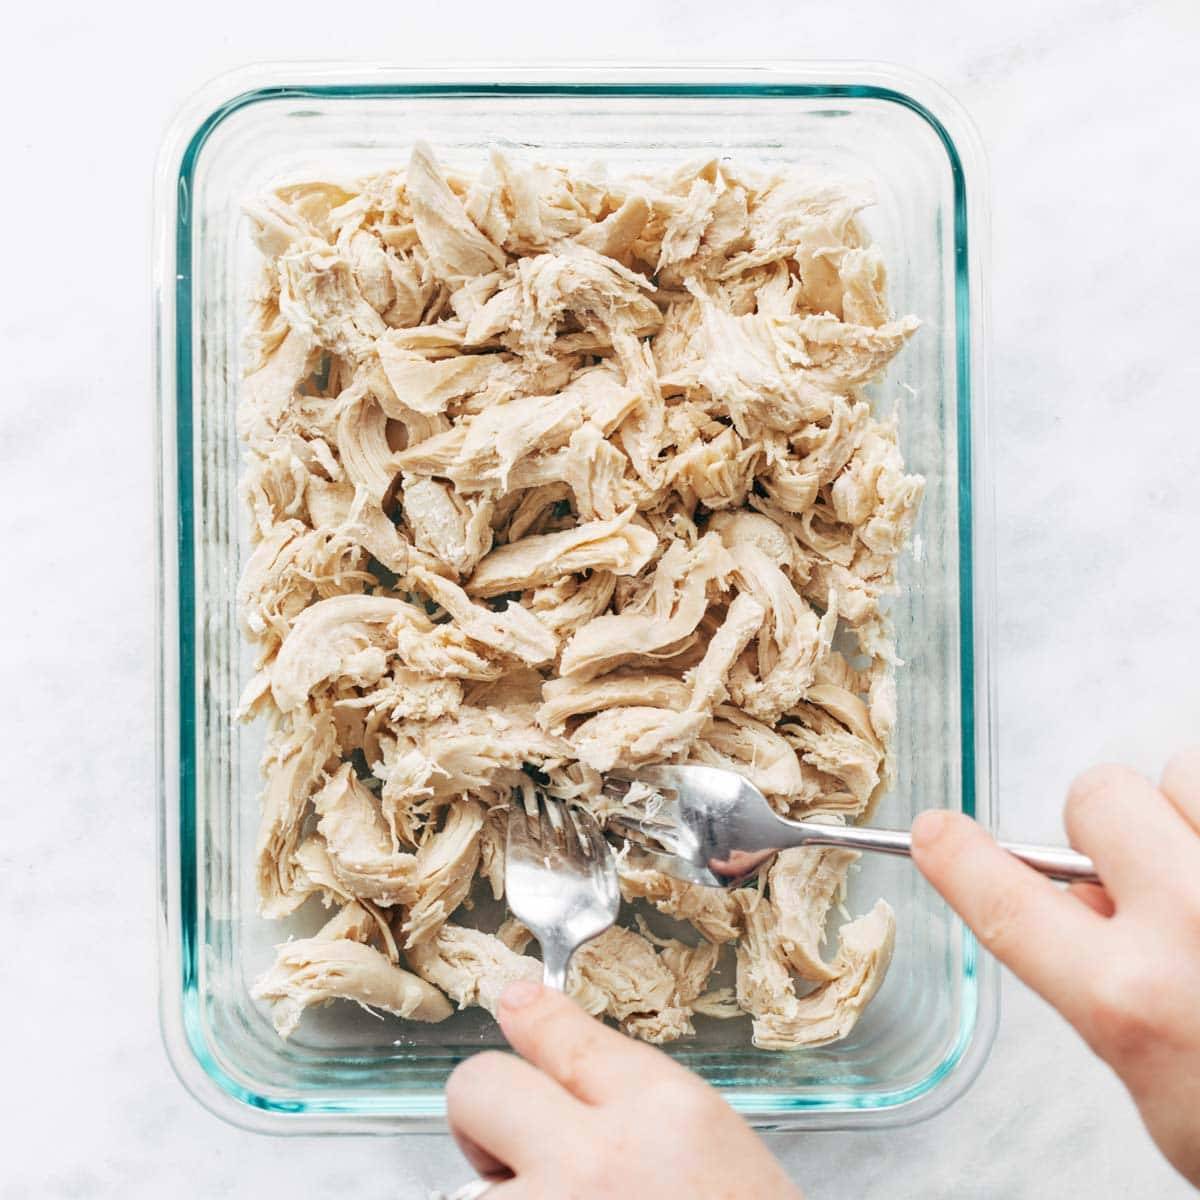 Shredded chicken in a container.